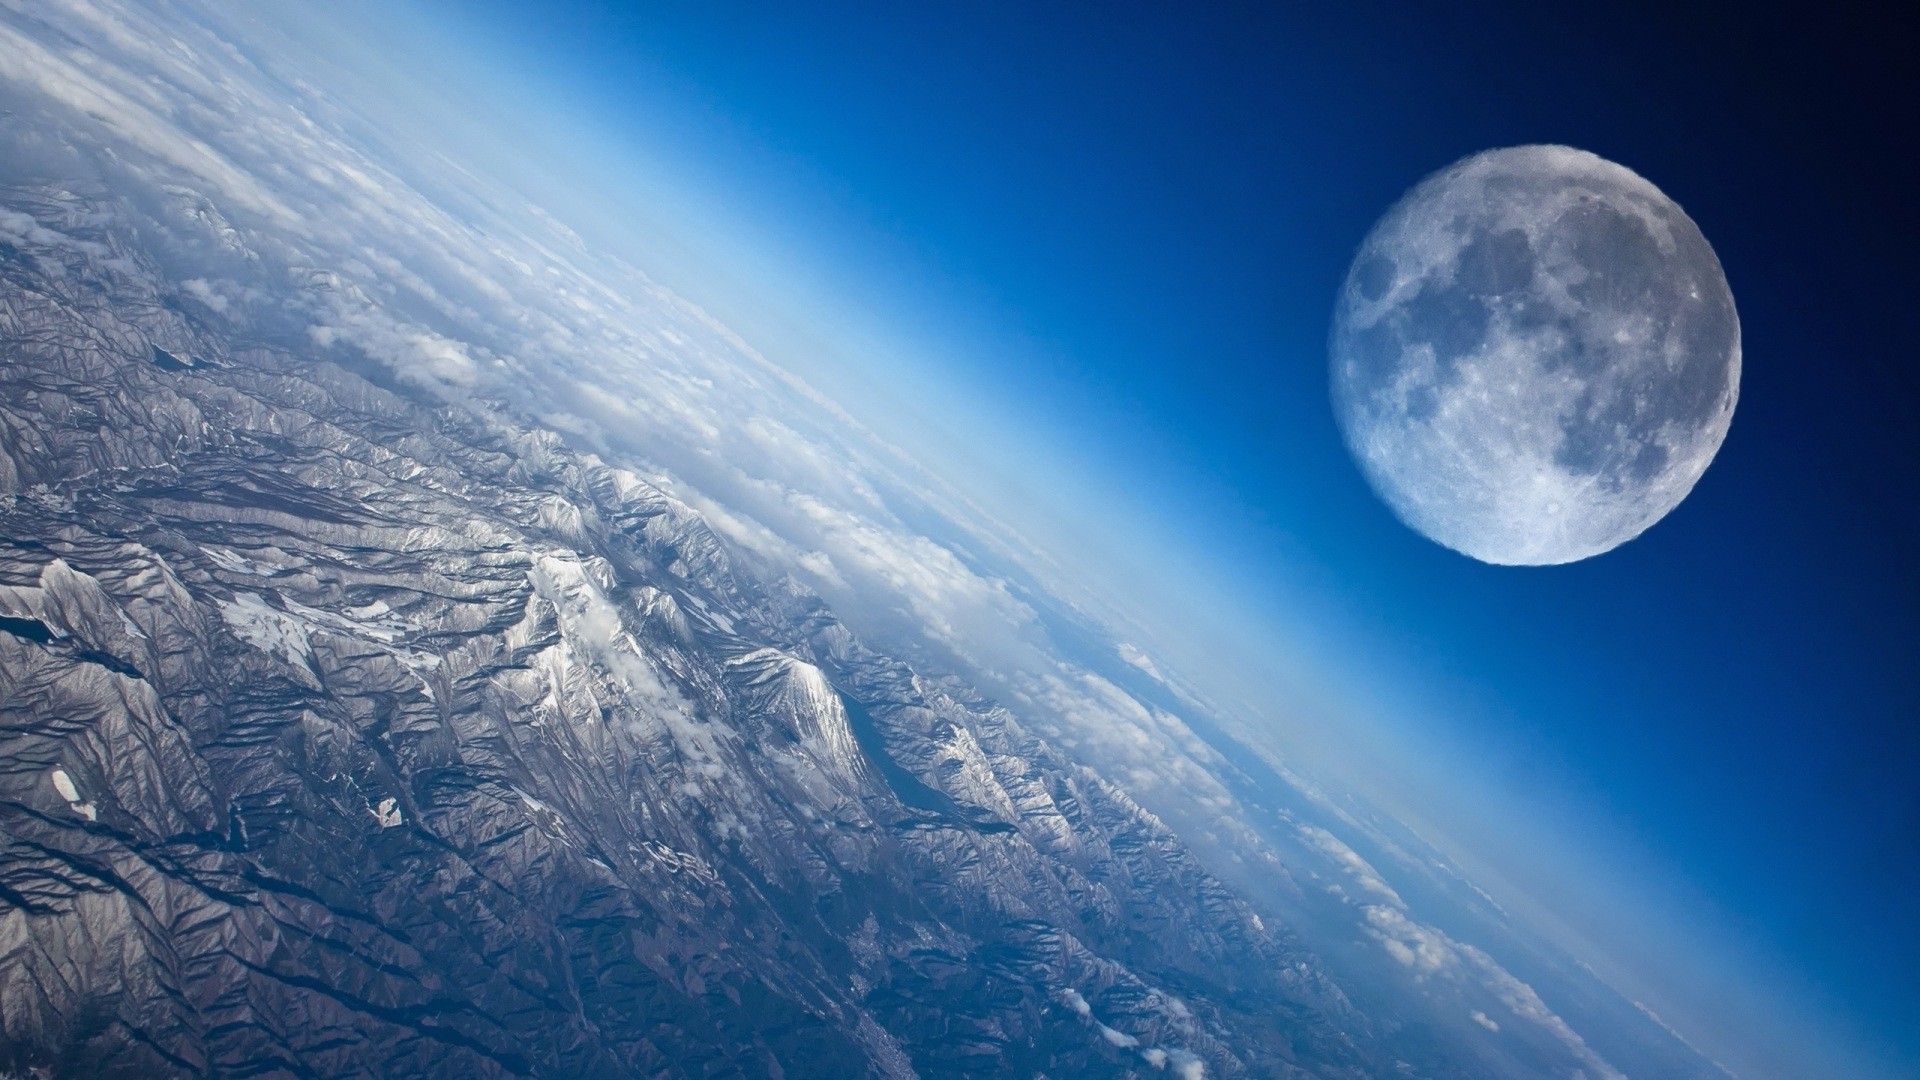 Moon Over The Mountains Space Hd Wallpaper 1920×1080 7181